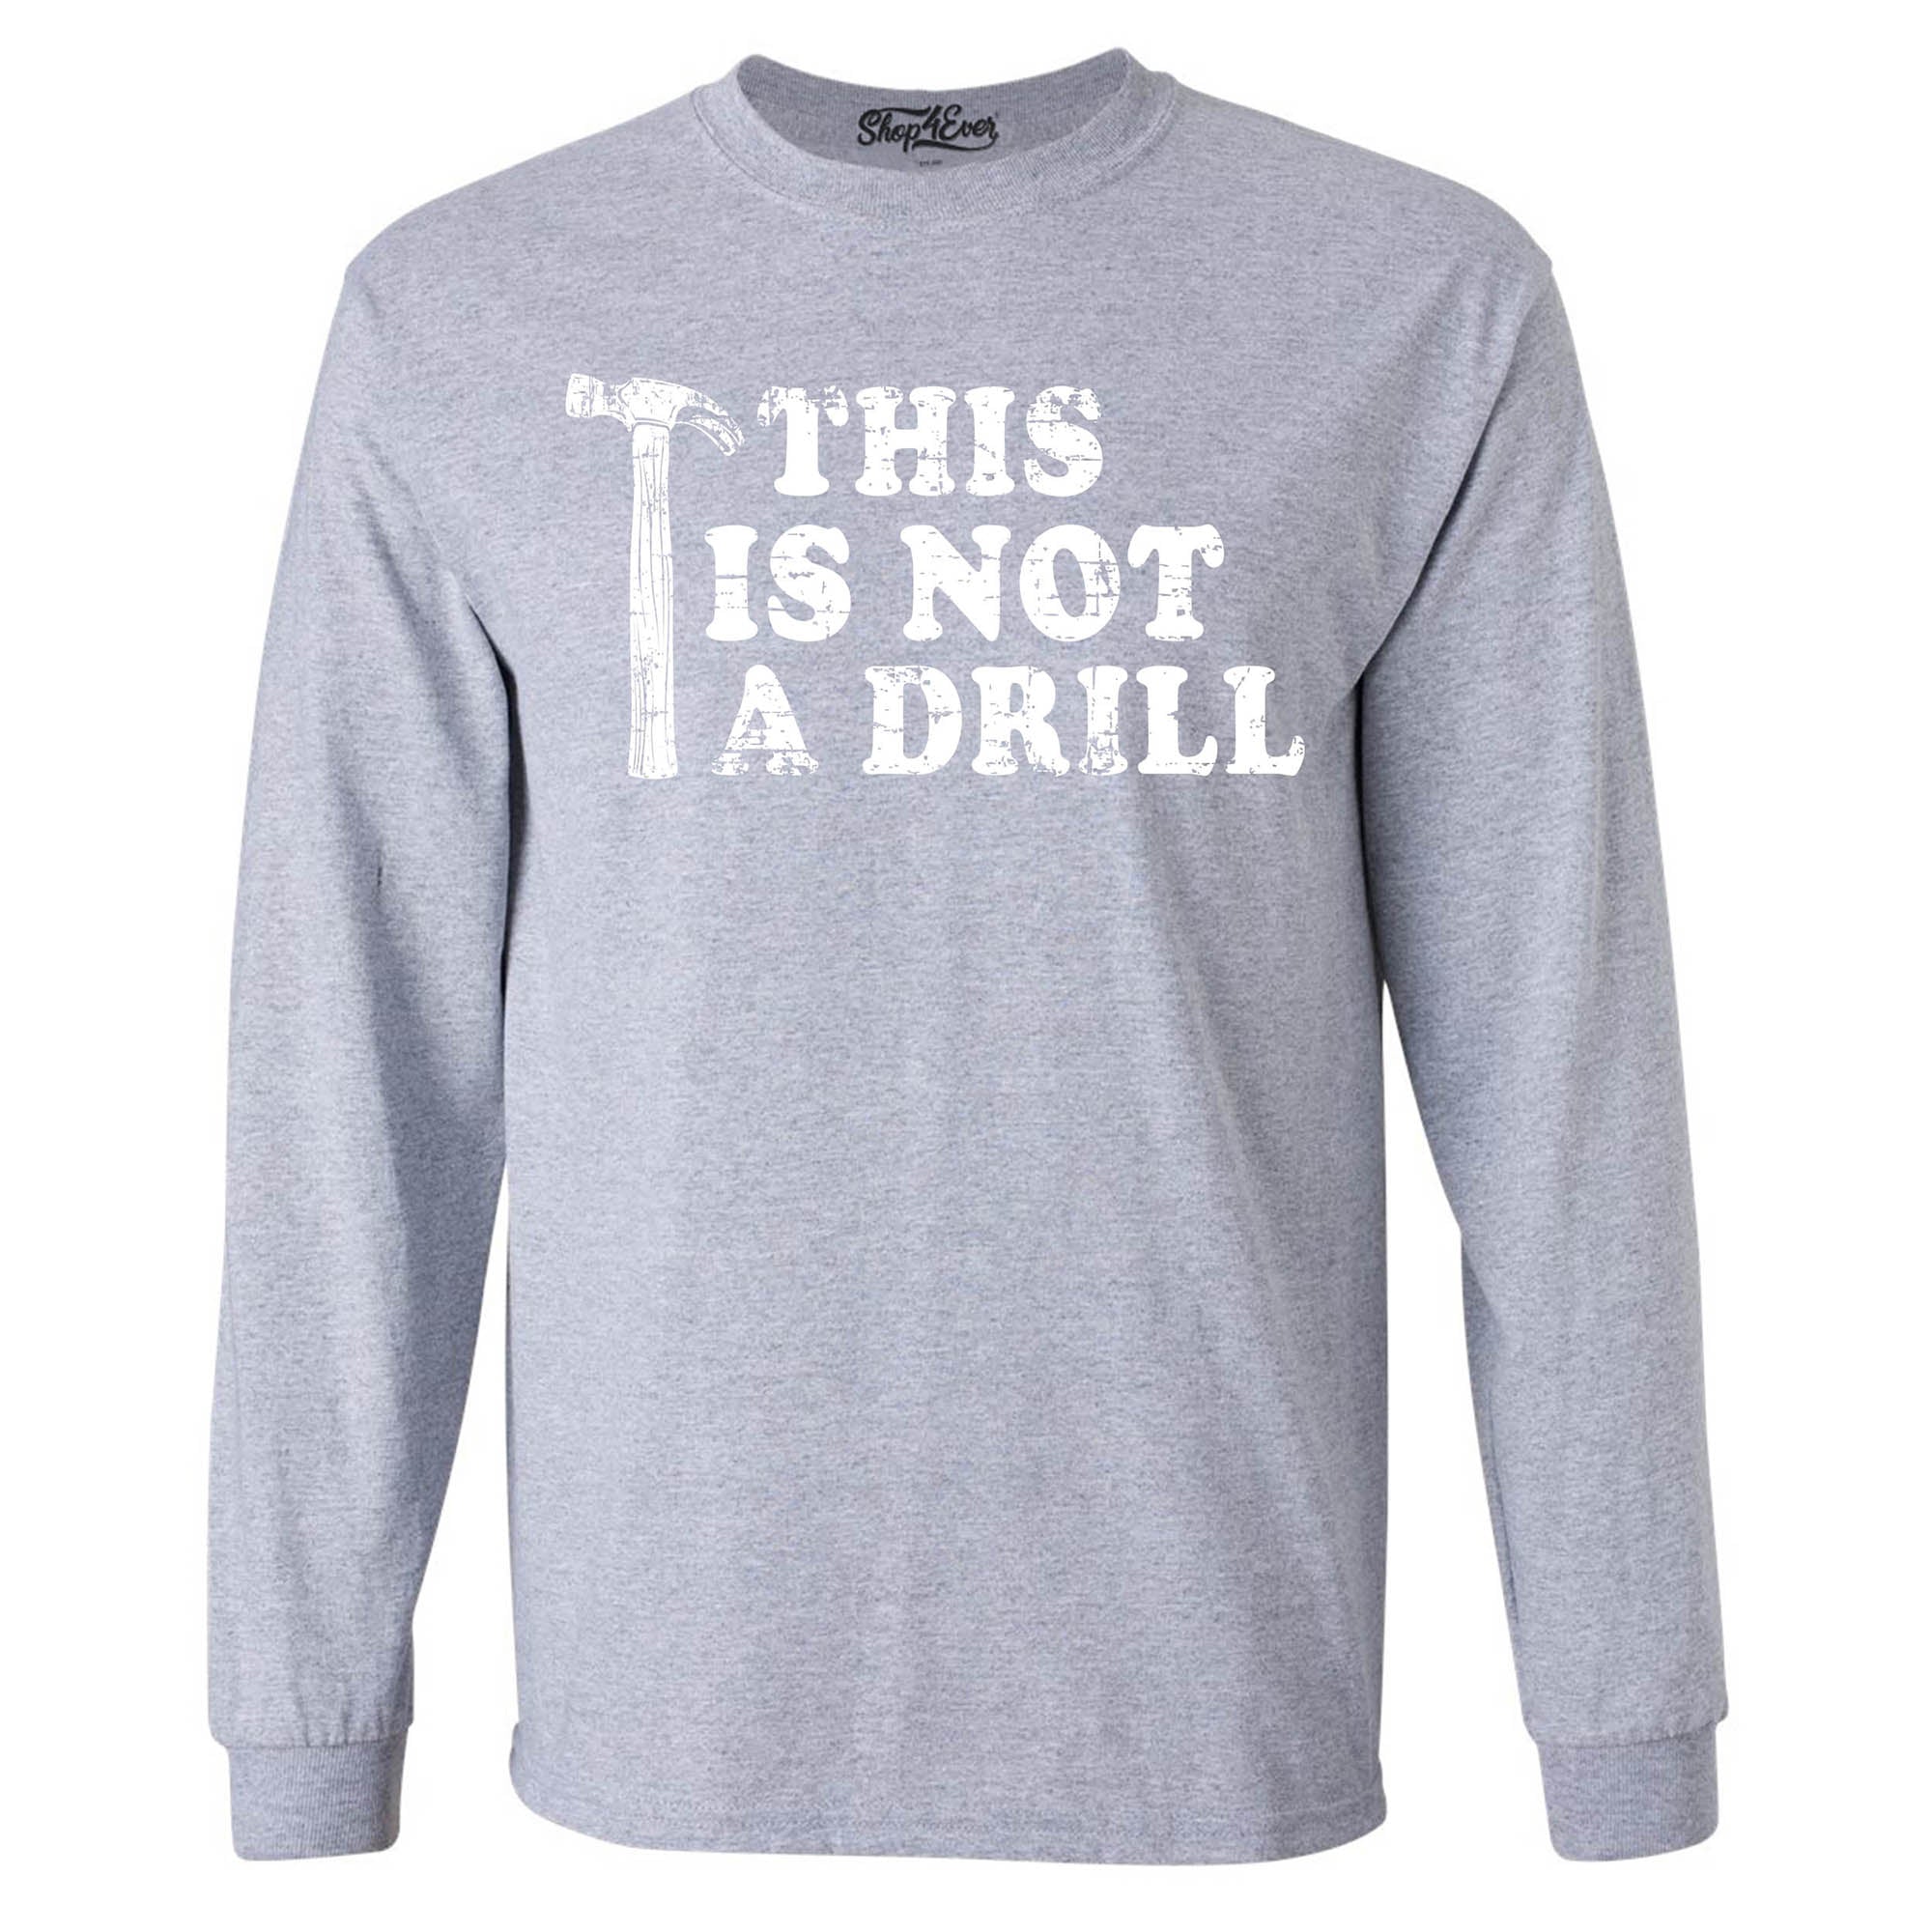 This is Not a Drill Long Sleeve Shirt